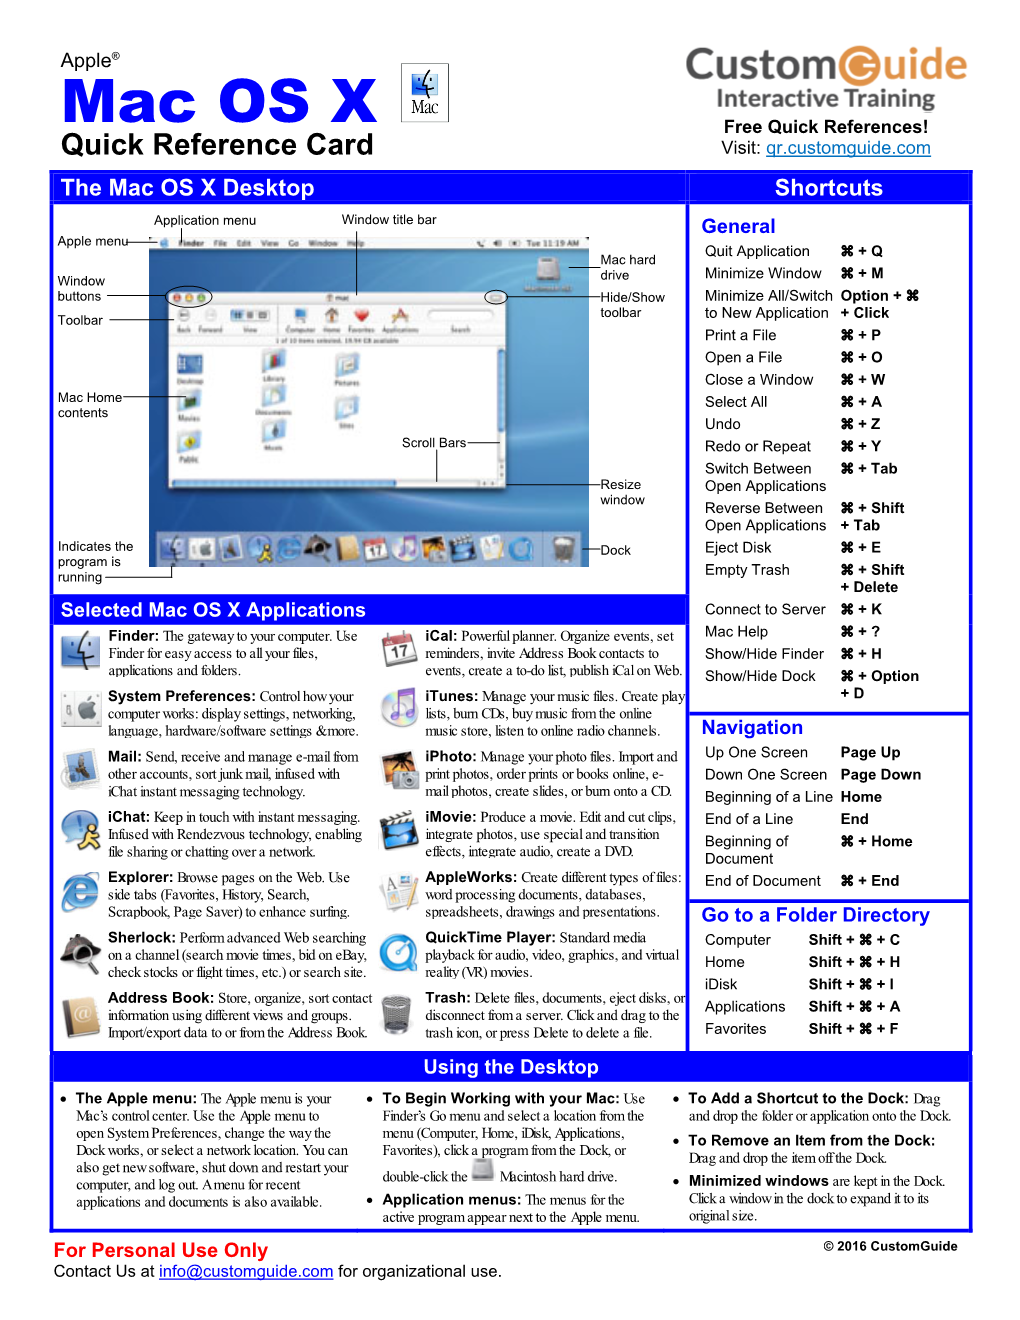 Mac OS X Quick Reference